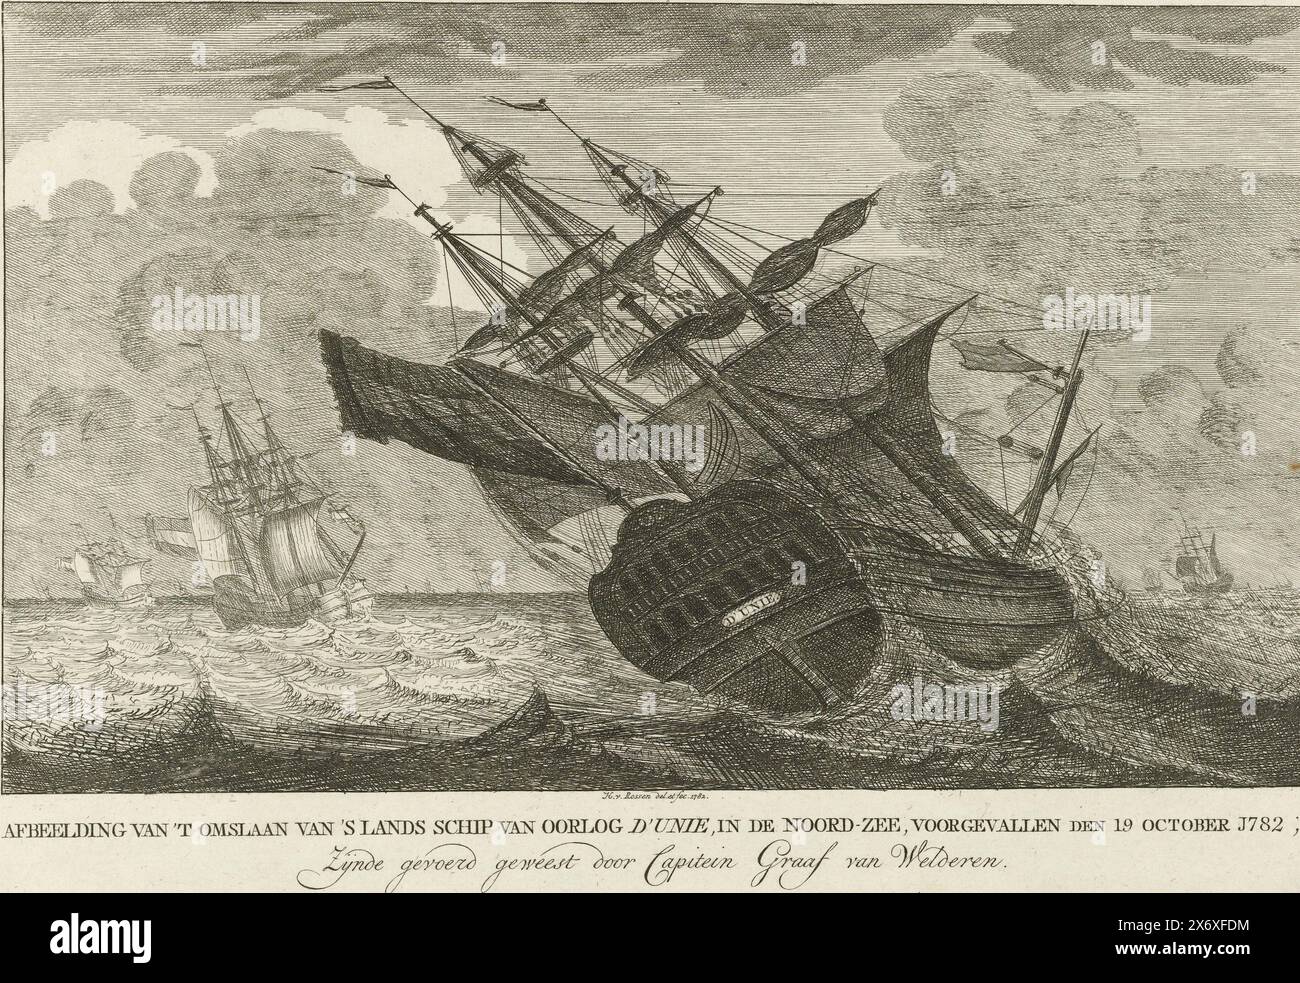 Sinking of the ship De Unie, 1782, Image of the capsizing of the country's warship De Unie, in the North Sea, which occurred on October 19, 1782; Having been conducted by Captain Graaf van Welderen (title on object), The sinking of the warship the 'Unie' under the command of captain L.M. van Welderen on the North Sea on October 19, 1782., print, print maker: Hendrik R. van Rossen, (mentioned on object), after own design by: Hendrik R. van Rossen, (mentioned on object), Northern Netherlands, 1782, paper, etching, engraving, height, 220 mm × width, 318 mm Stock Photo